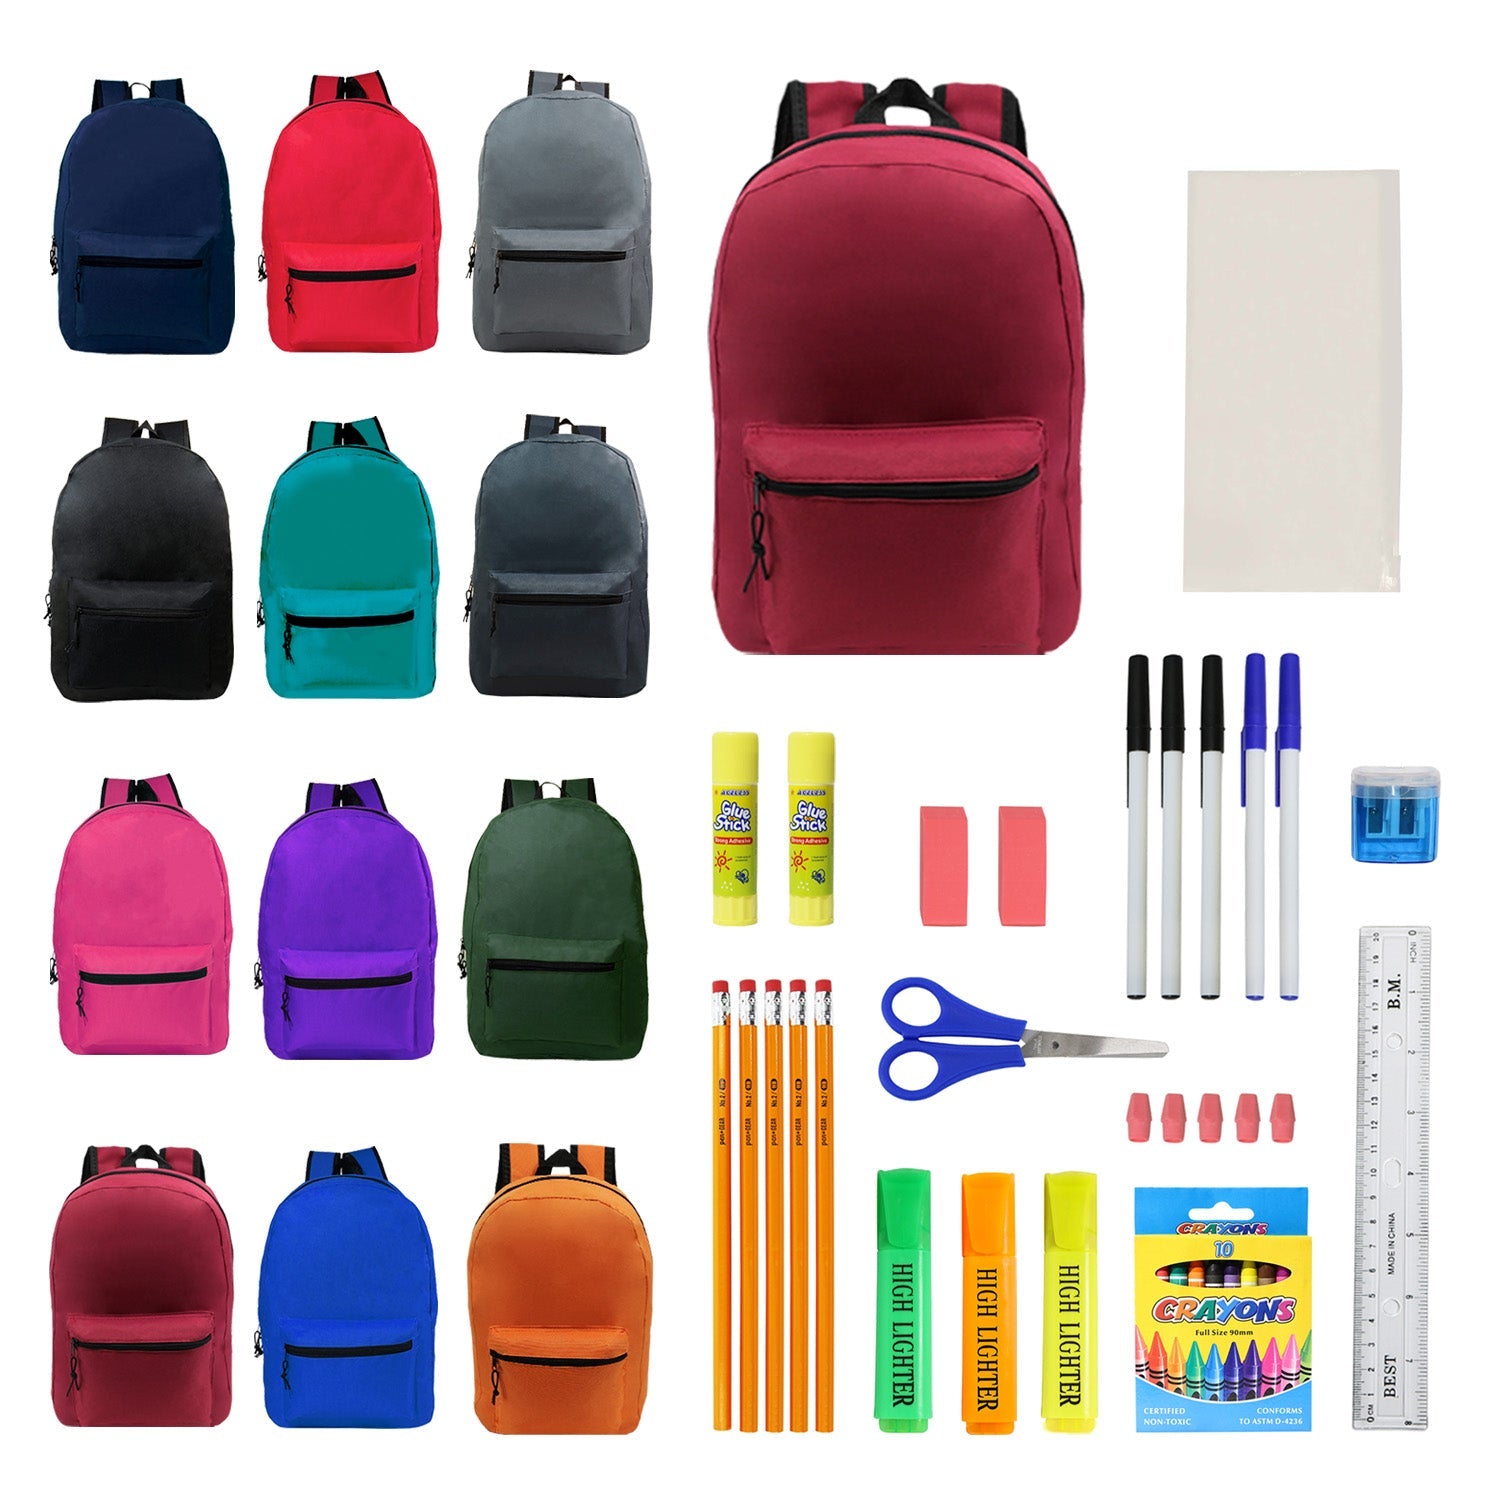 17 Inch Bulk Backpacks in Assorted Colors with School Supply Kits Wholesale - Case of 24 (12 Color Assortment)